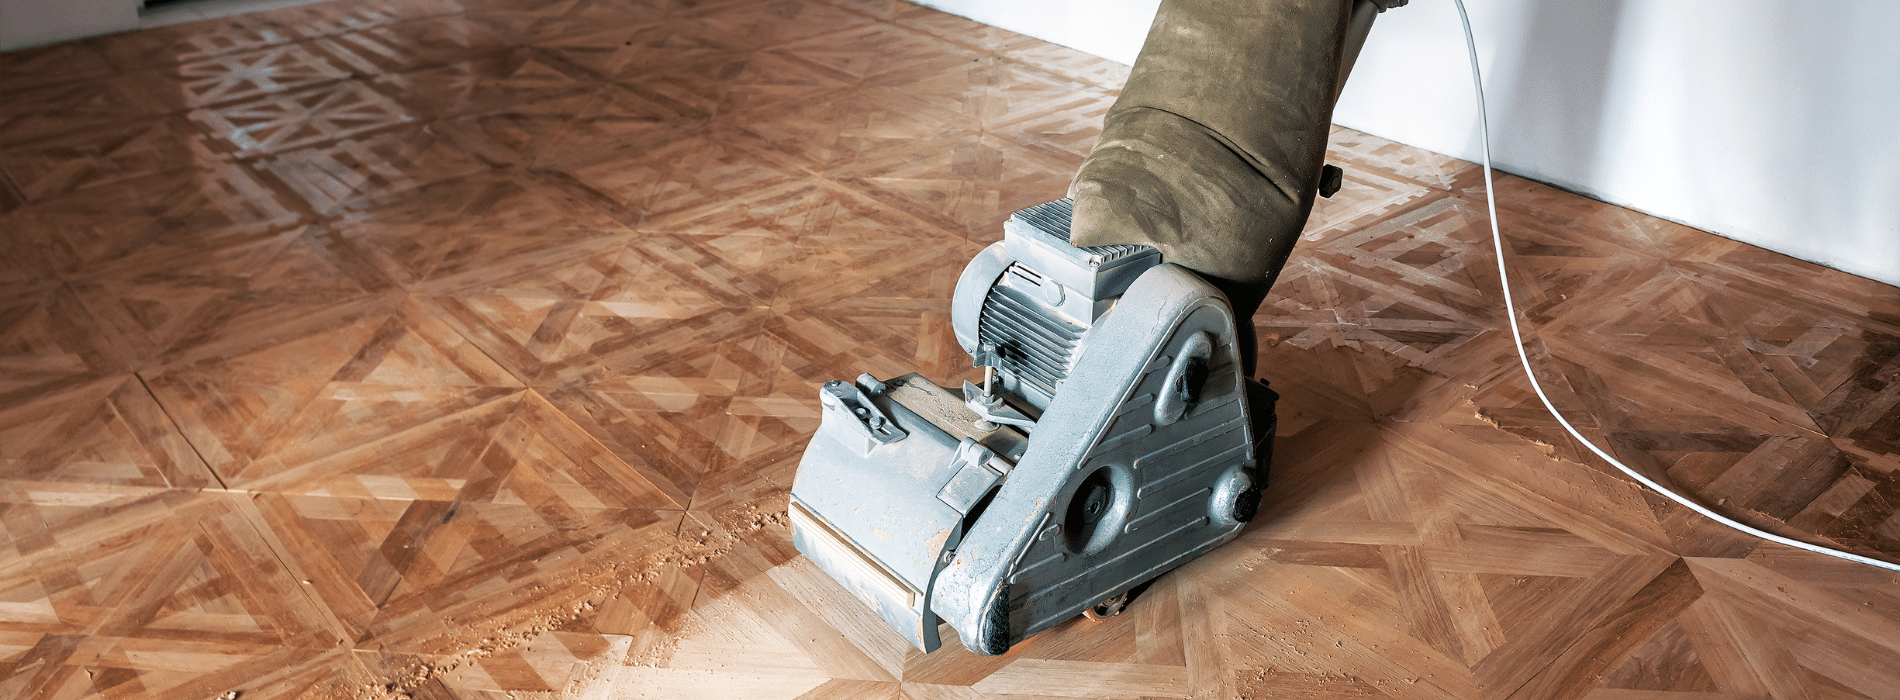 A skilled worker operating a Bona belt drum sander 240v, dimension 200mm on a herringbone floor in Hampstead, NW3. The worker's hands firmly grip the sander as they guide it across the surface. The sander is connected to a dust extraction system, effectively capturing the generated dust.